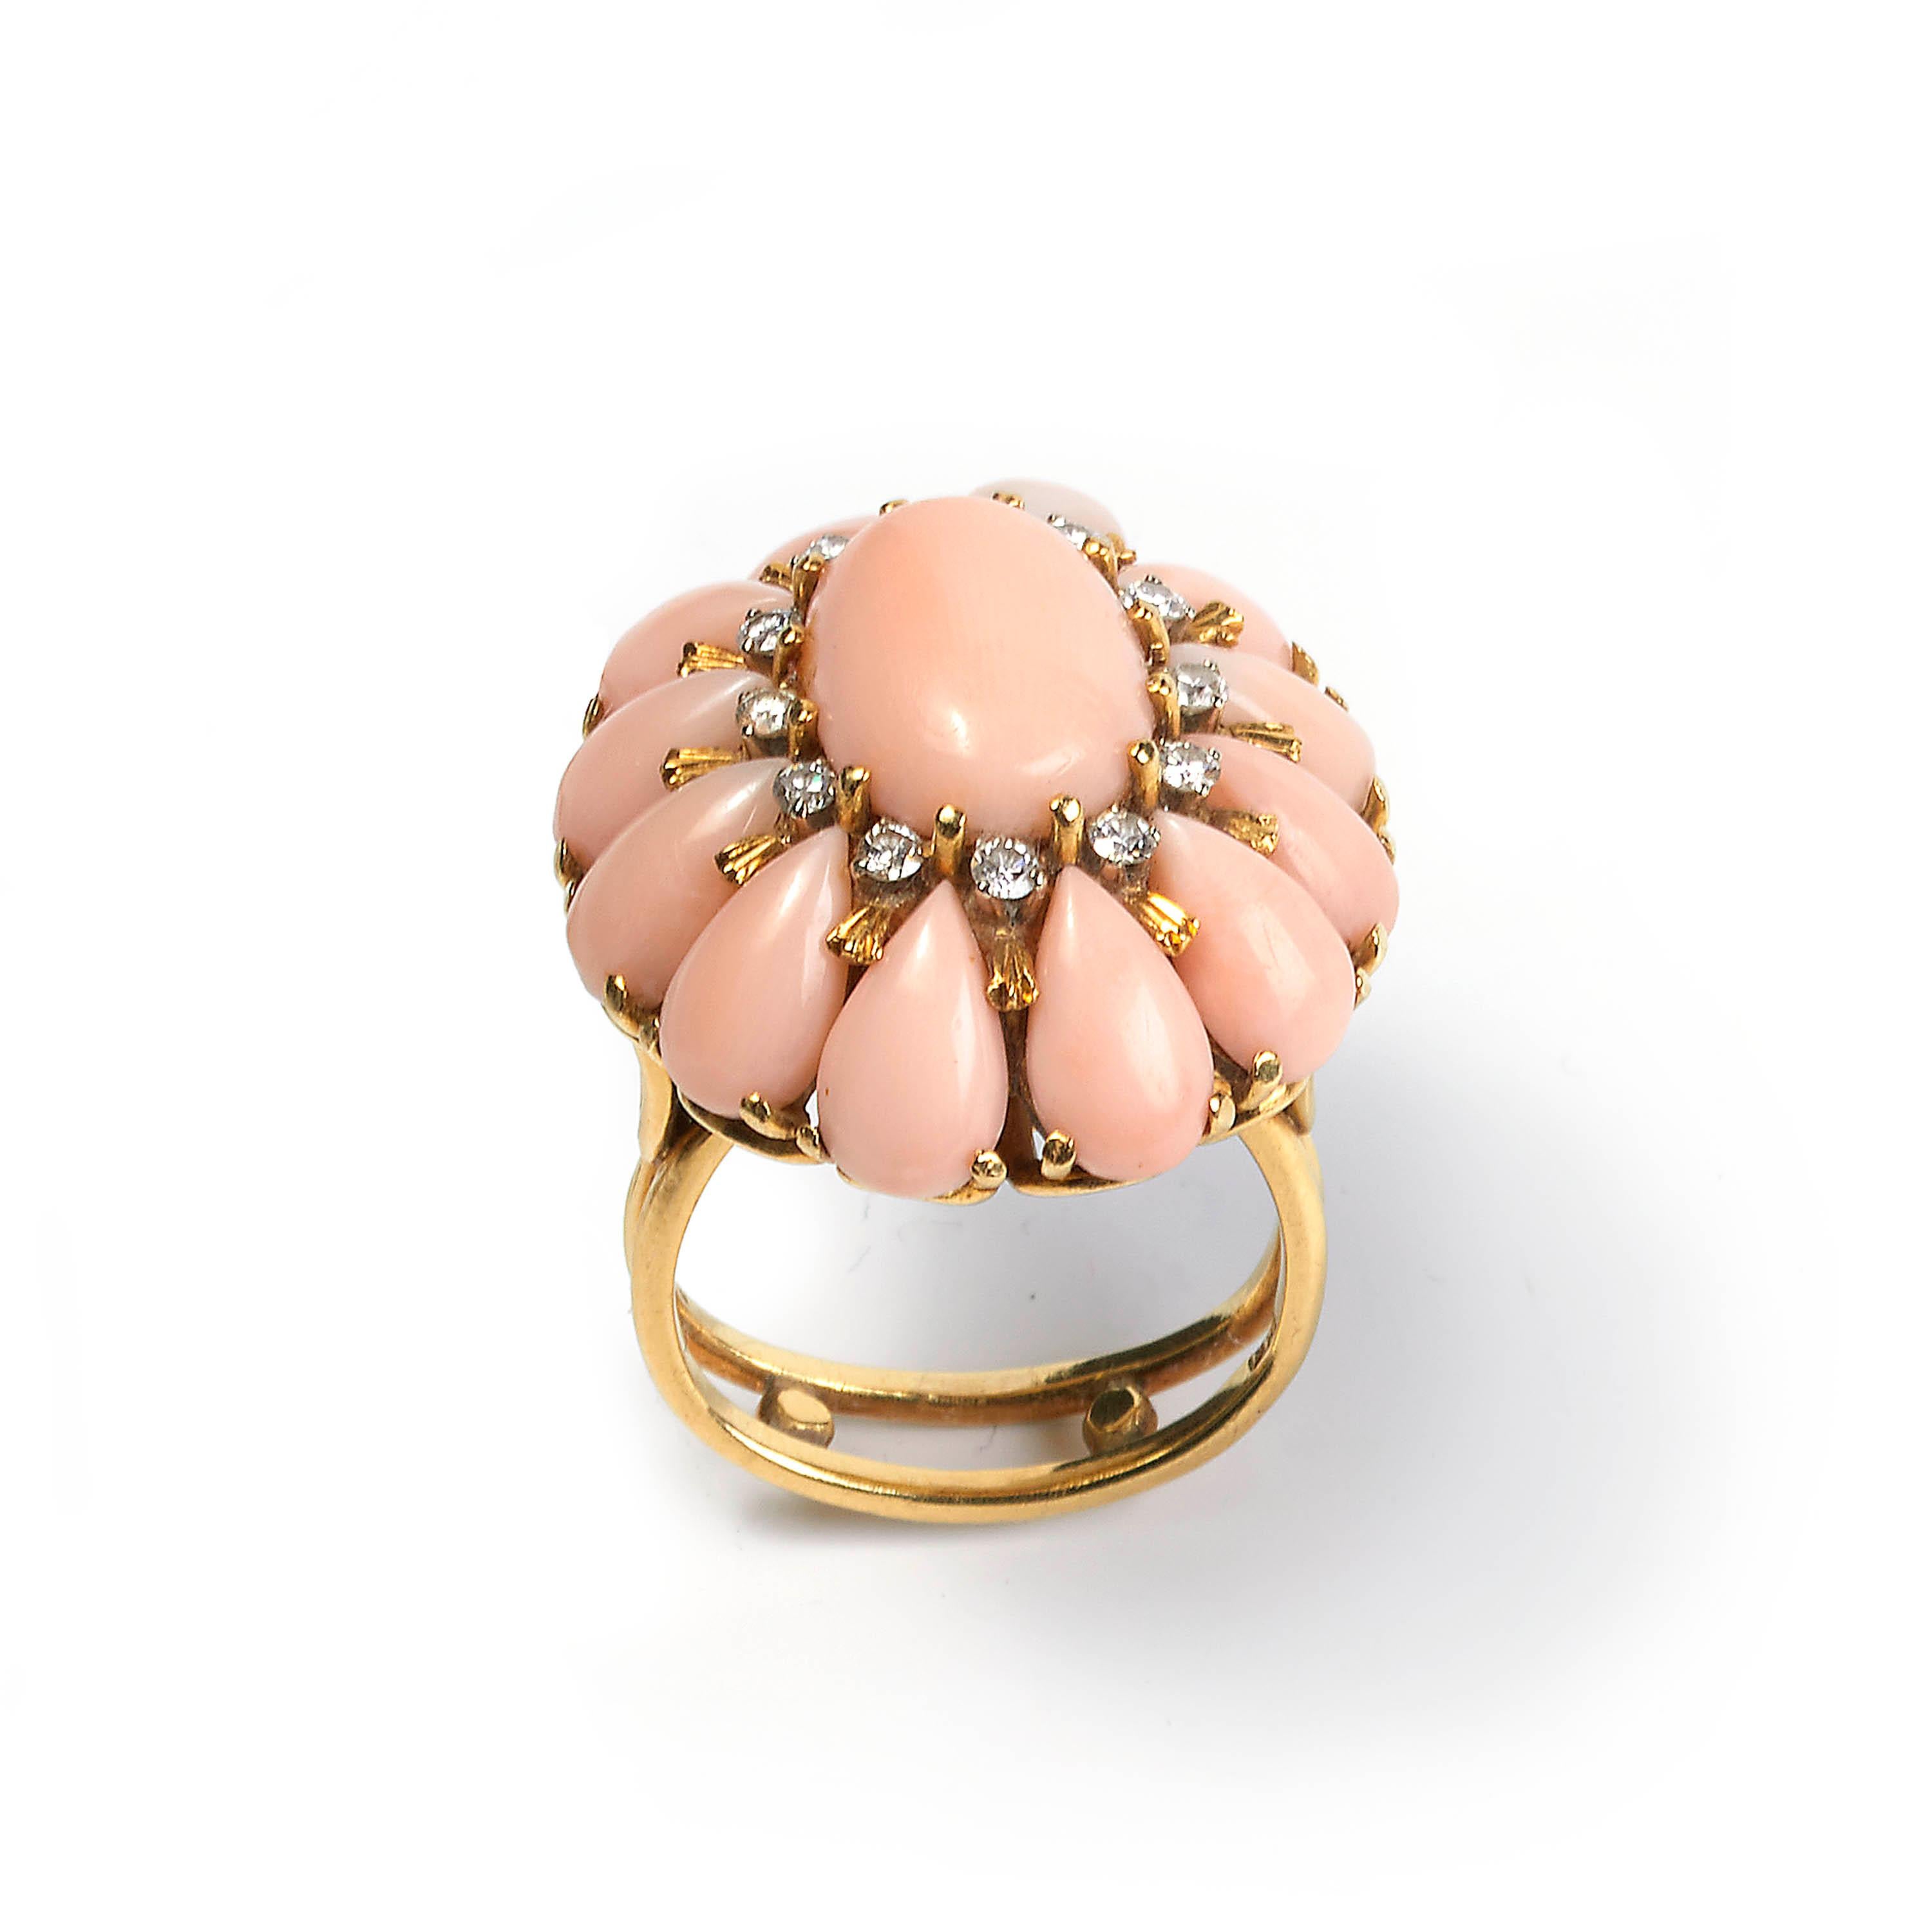 A vintage coral and diamond cluster ring, comprised of a central oval cabochon-cut coral, surrounded by twelve round brilliant-cut diamonds, and twelve pear-shaped corals in a cluster formation, mounted in 18ct yellow gold, Italian, circa 1970.

The